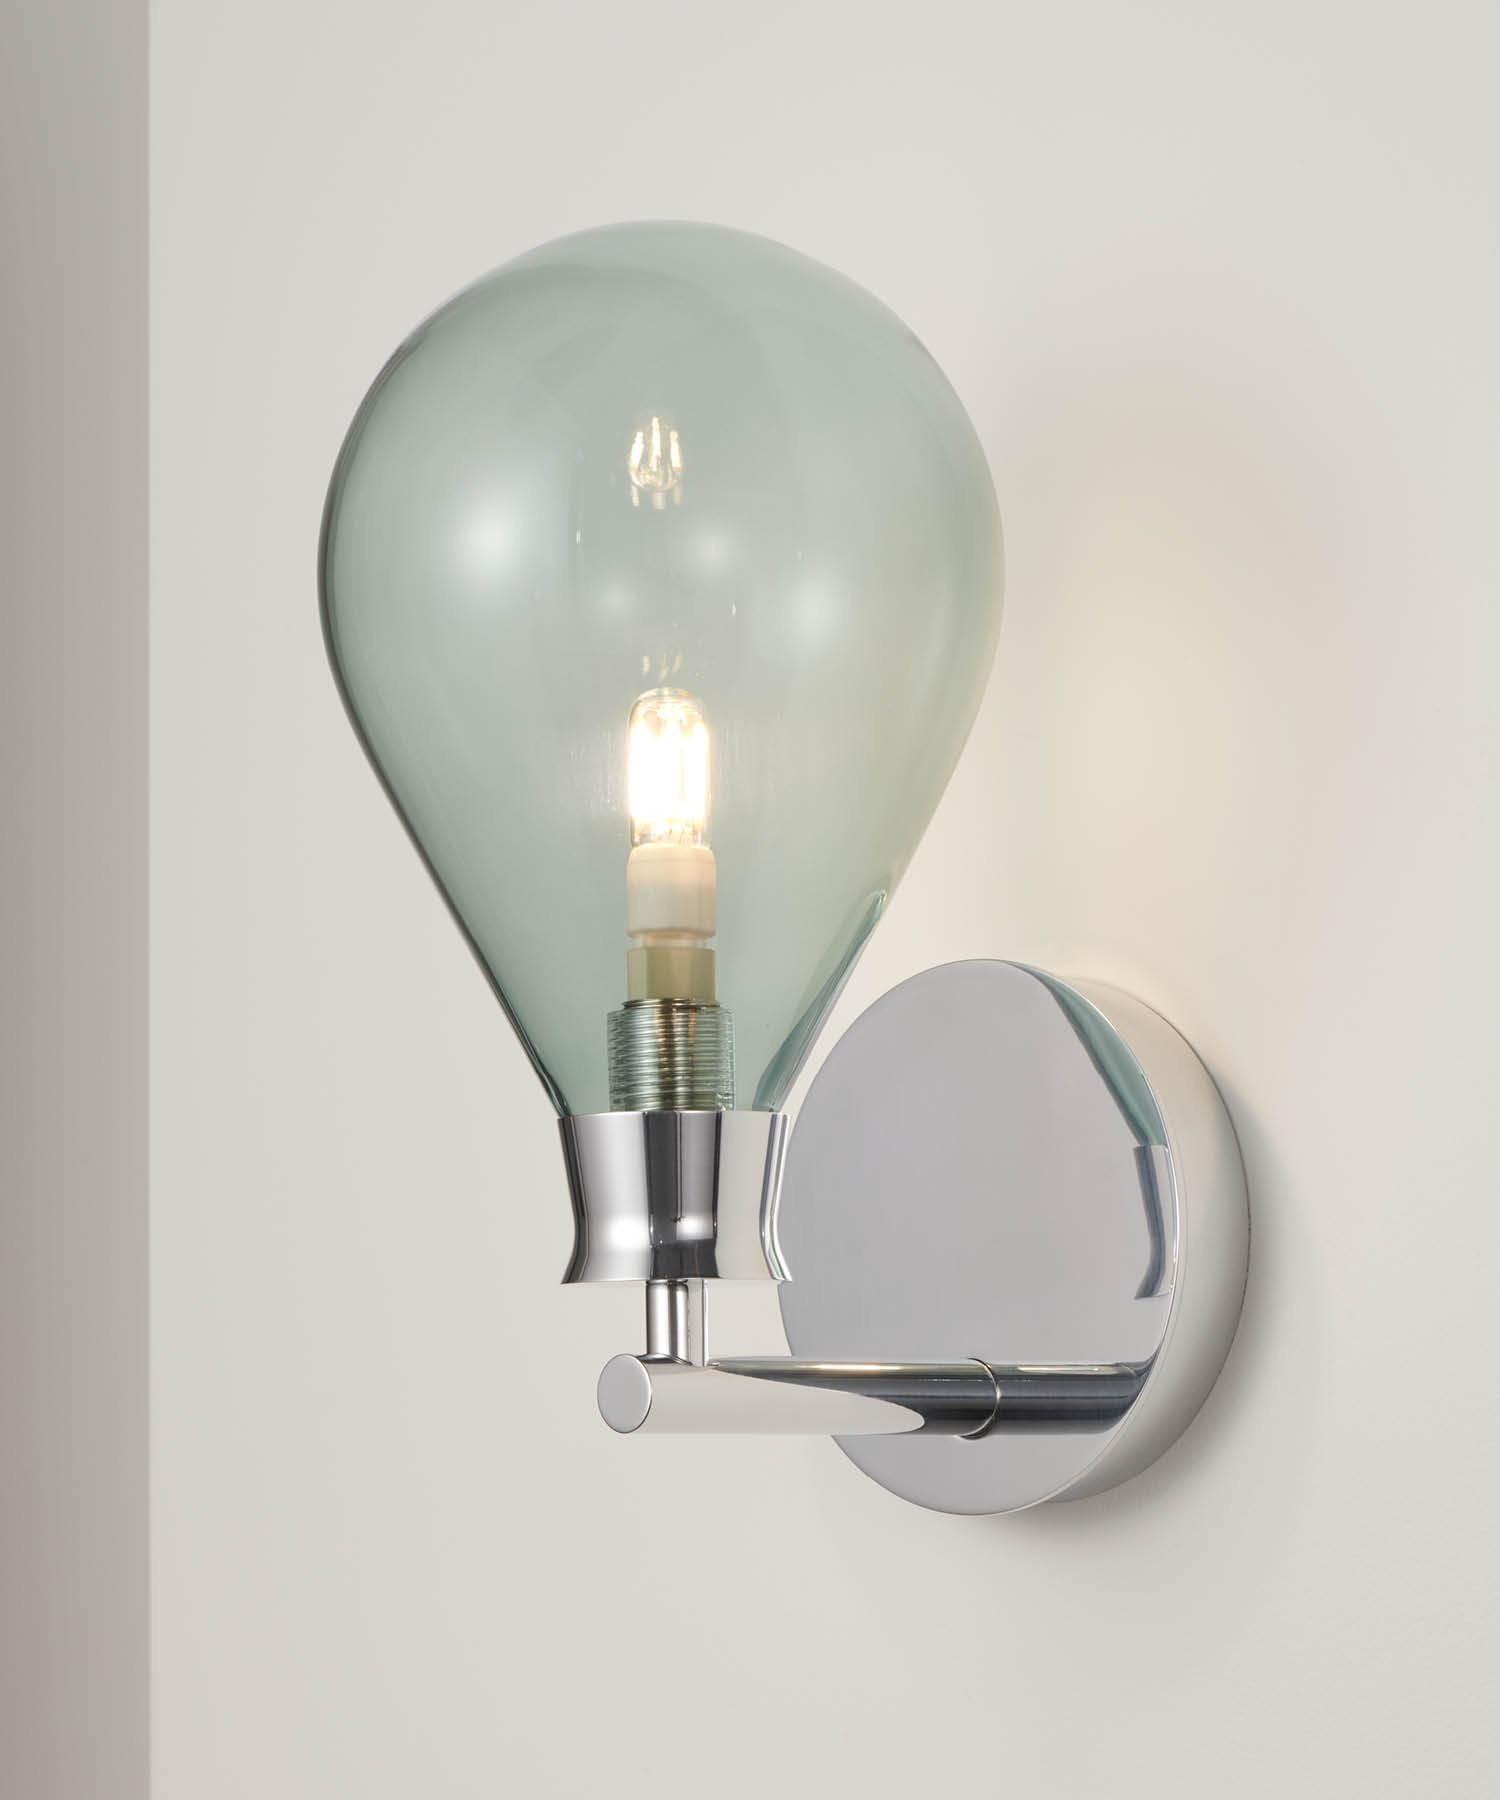 Anodized Cintola Wall Light in Polished Aluminium with Smoke Grey Handblown Glass Globe For Sale